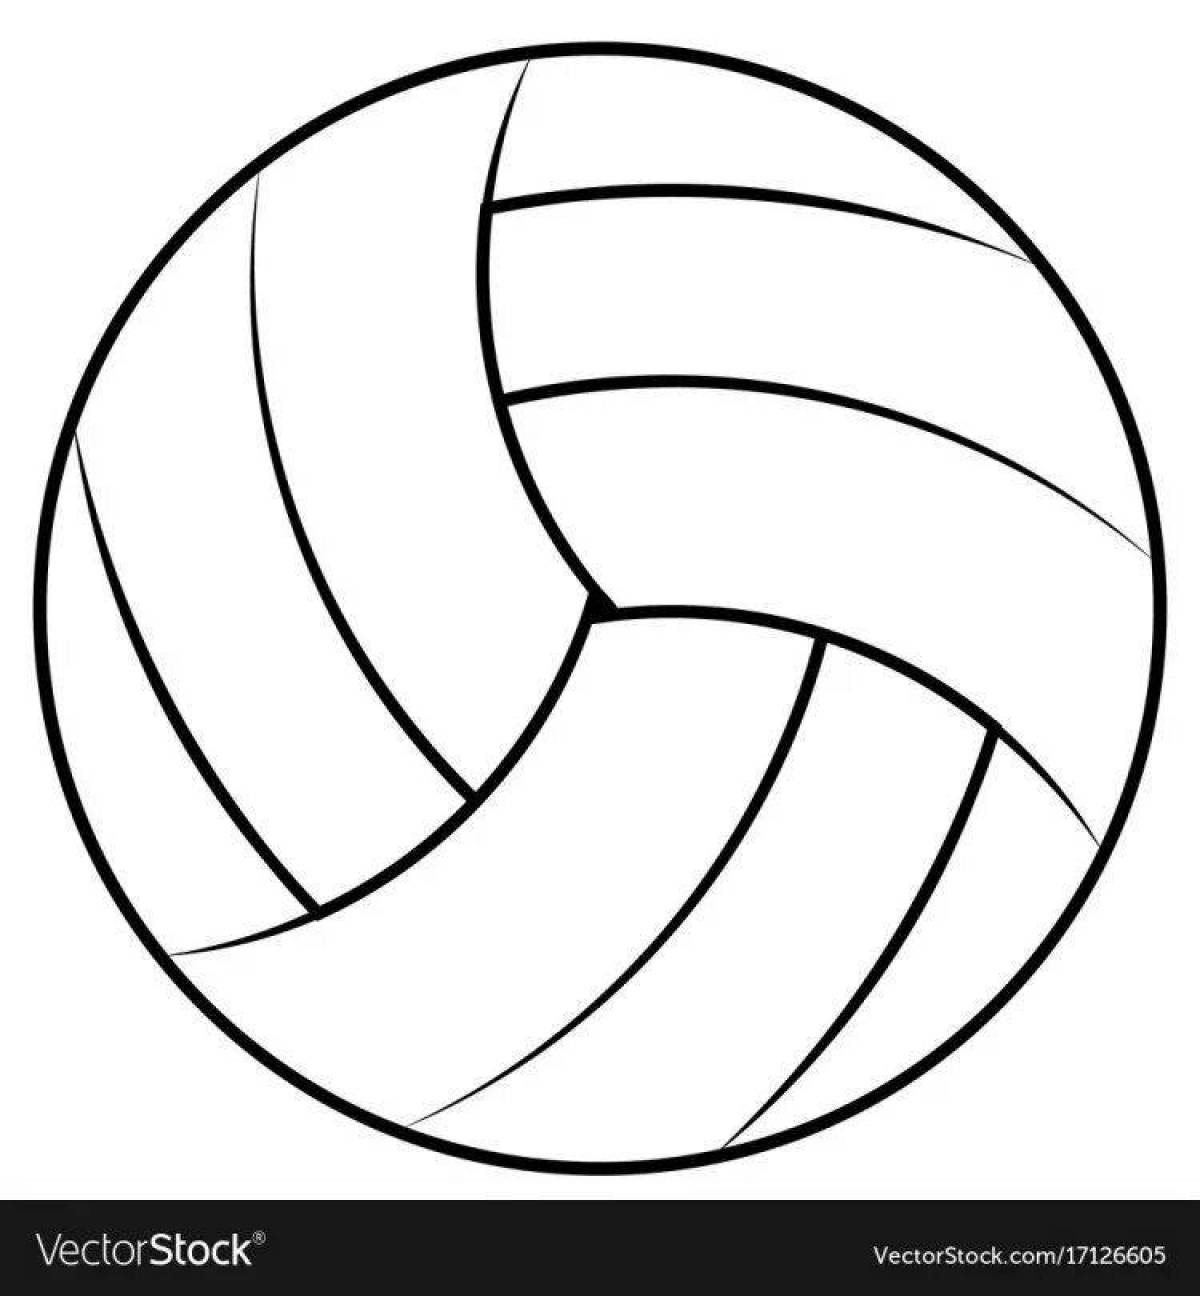 Tempting volleyball coloring page